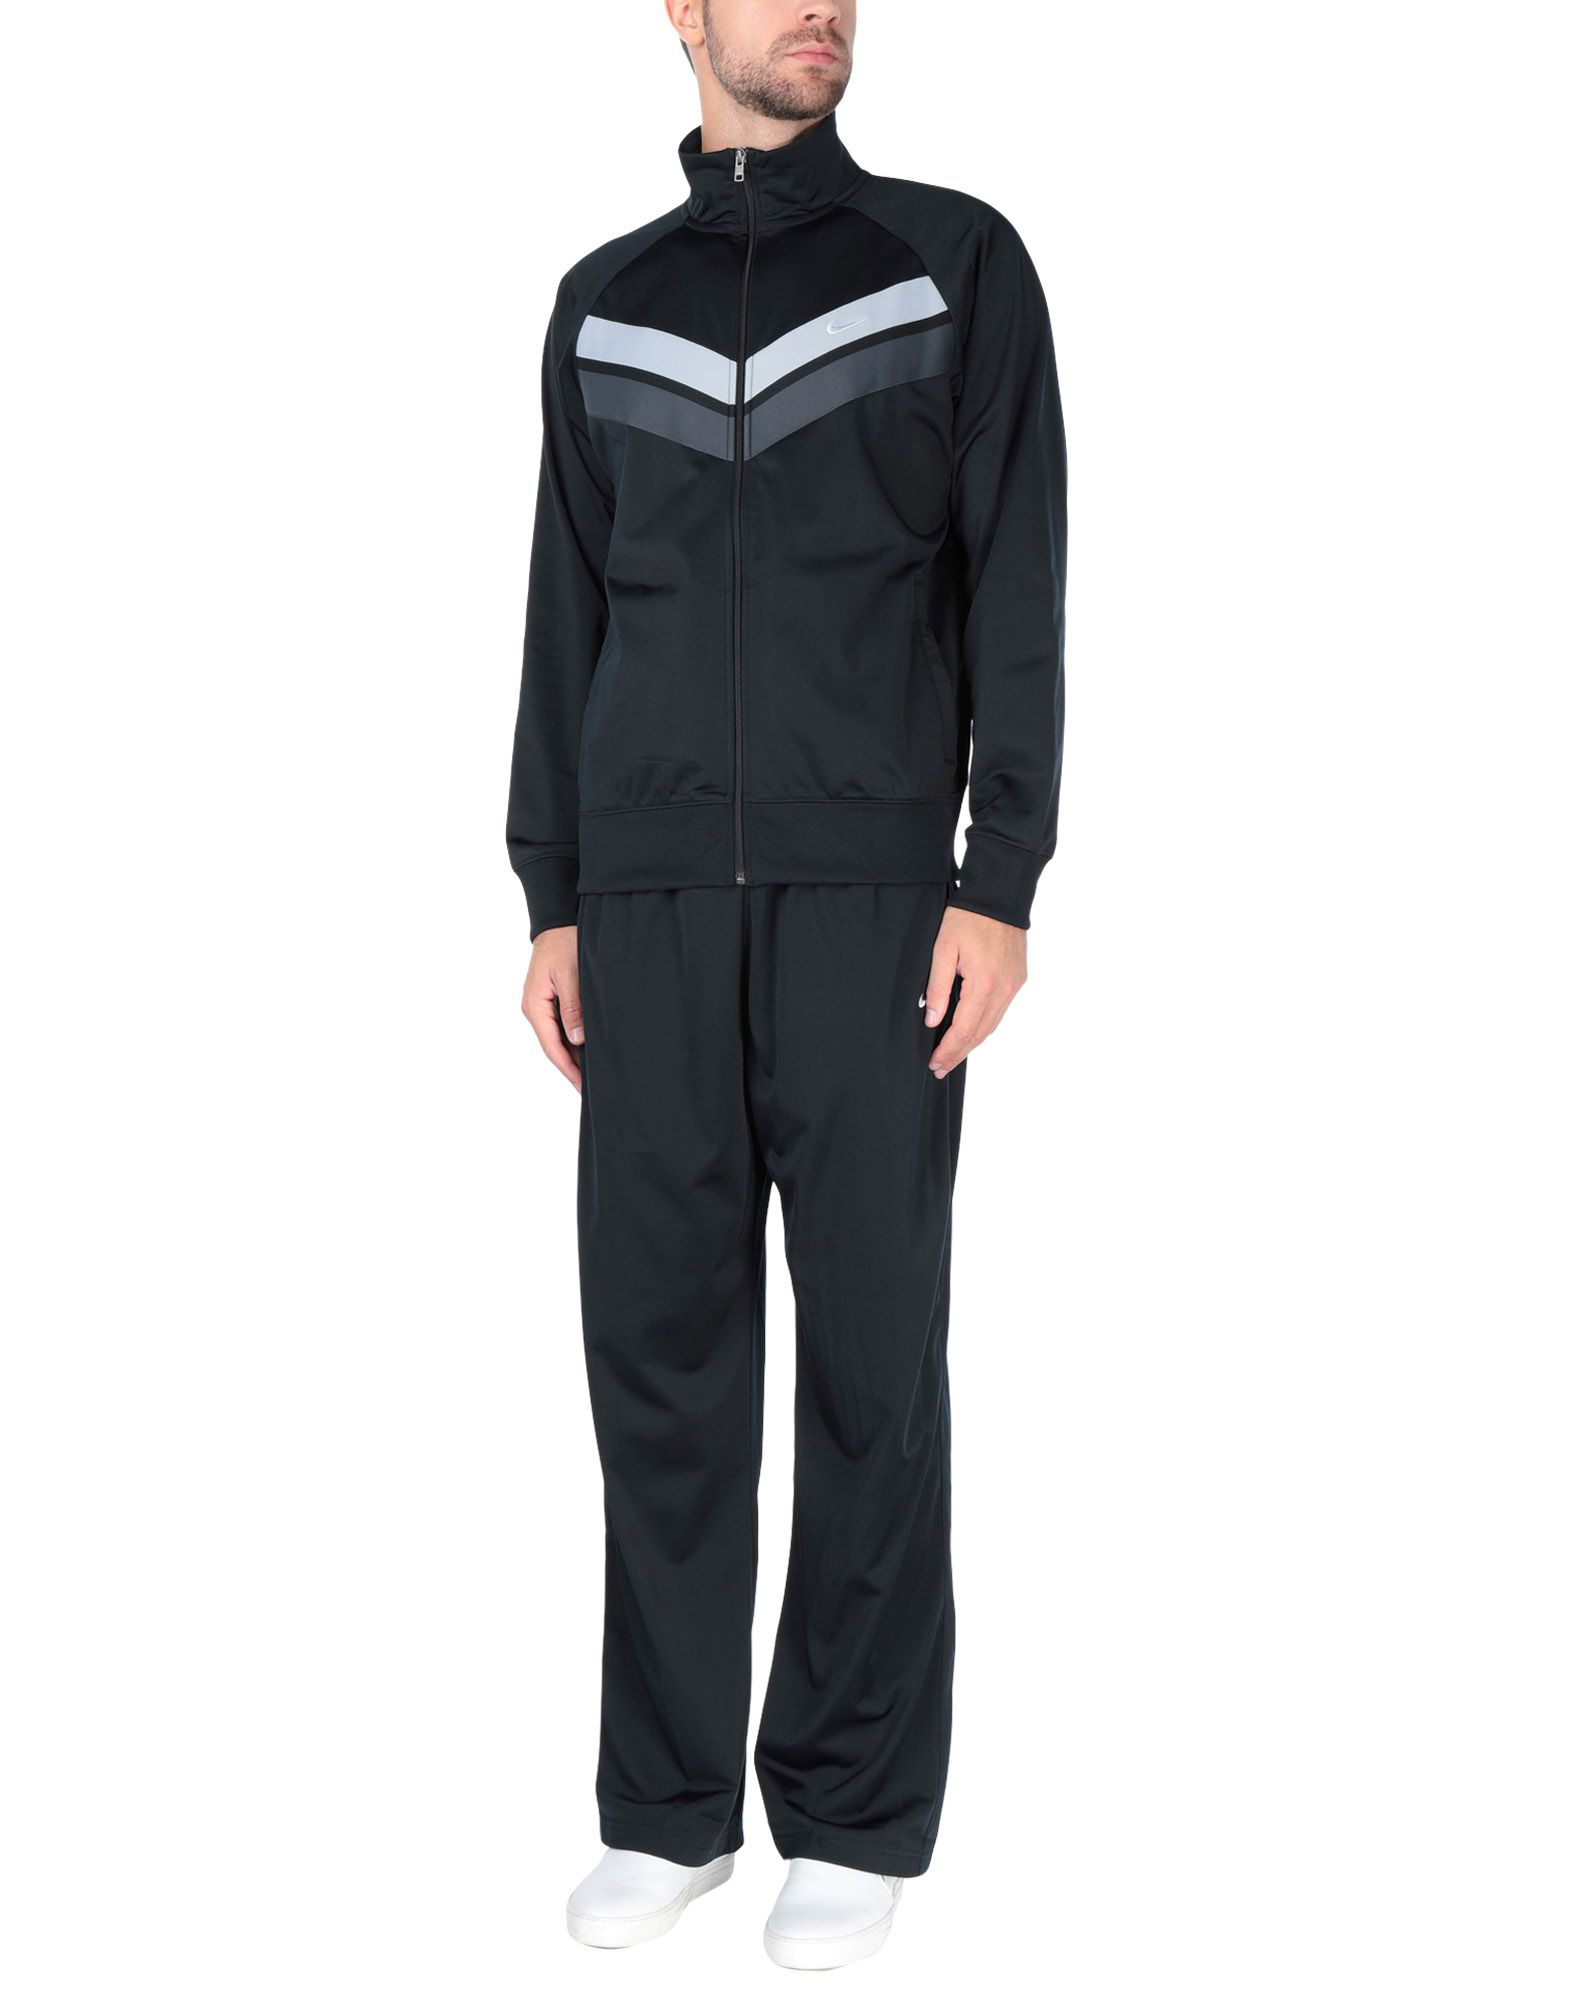 nike sweat suits for cheap